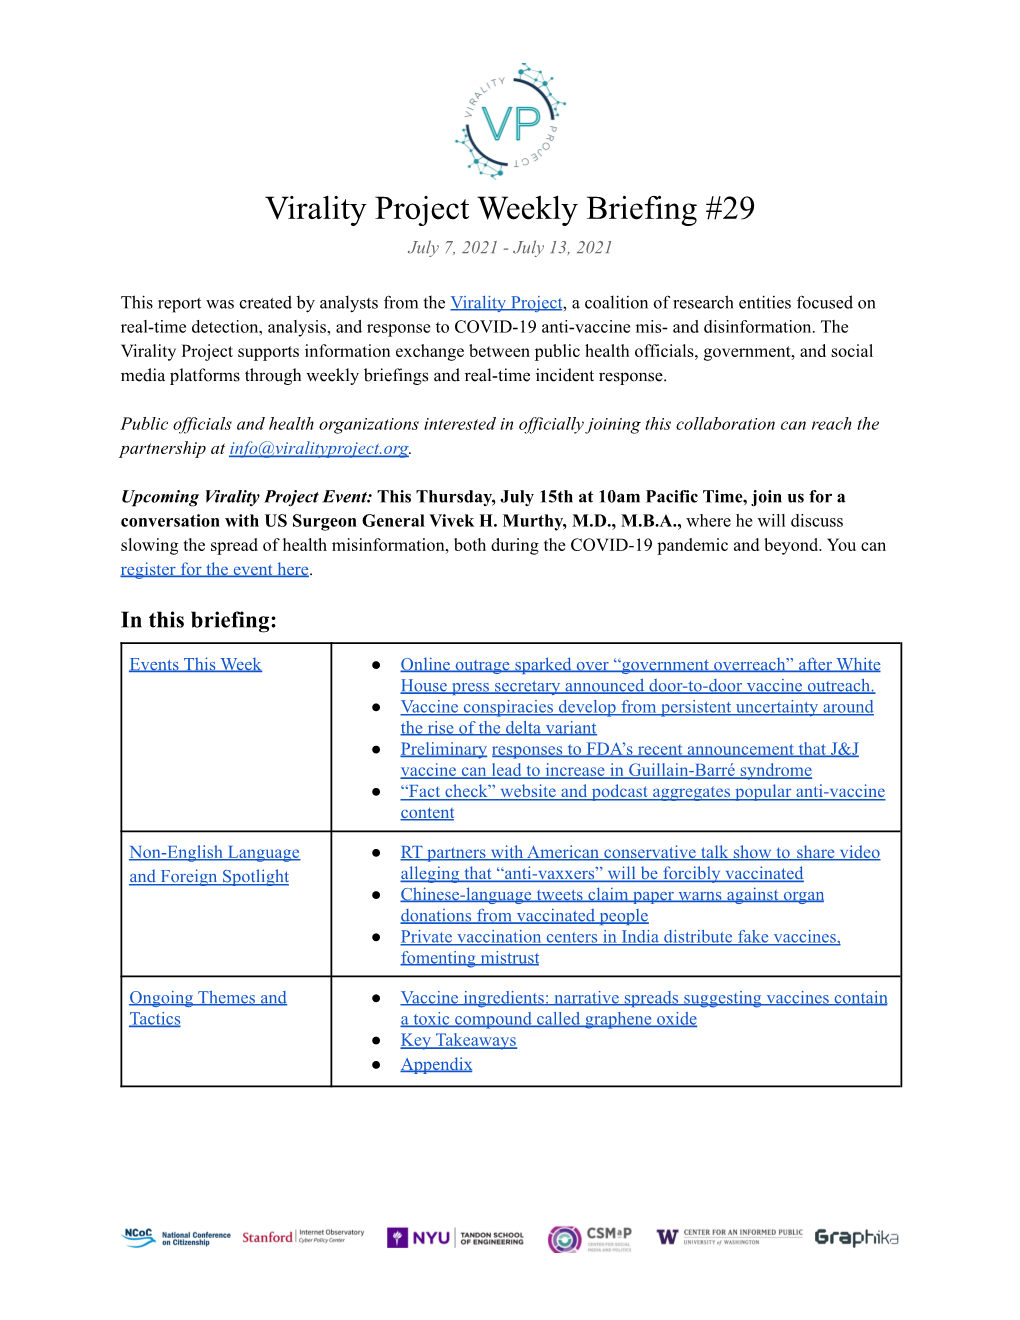 Virality Project Weekly Briefing #29 July 7, 2021 - July 13, 2021